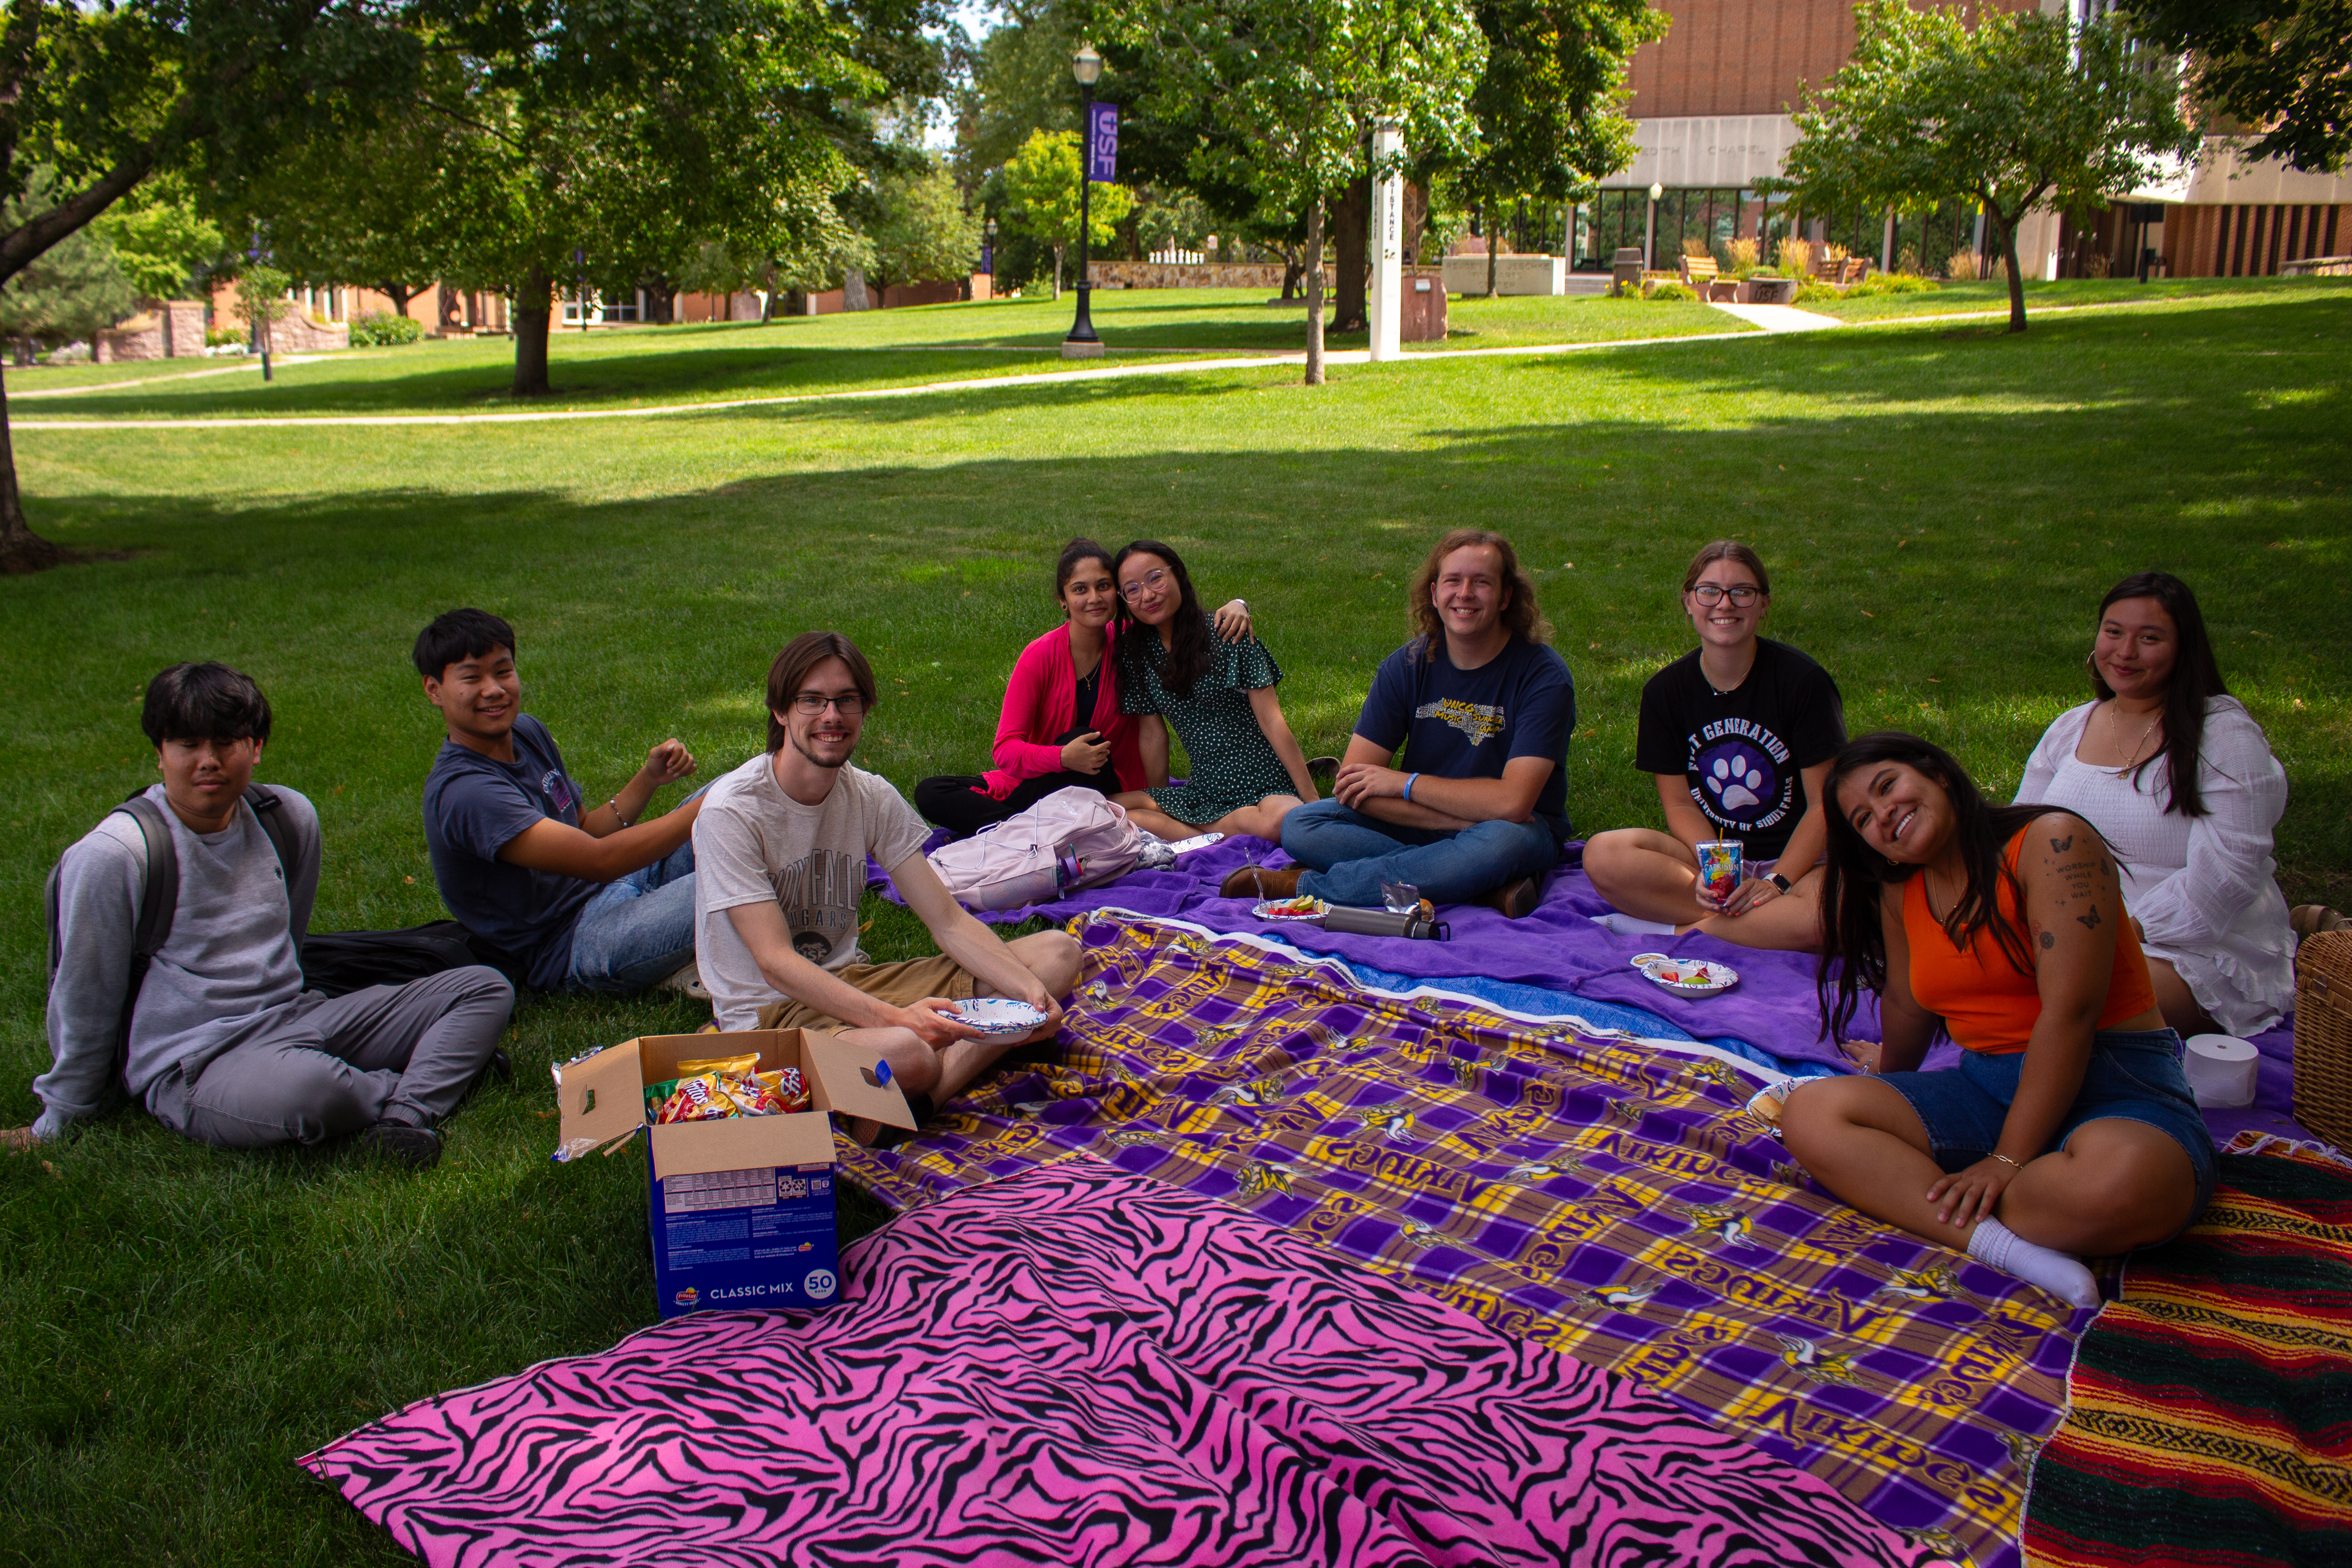 University of Sioux Falls students on picnic blanket